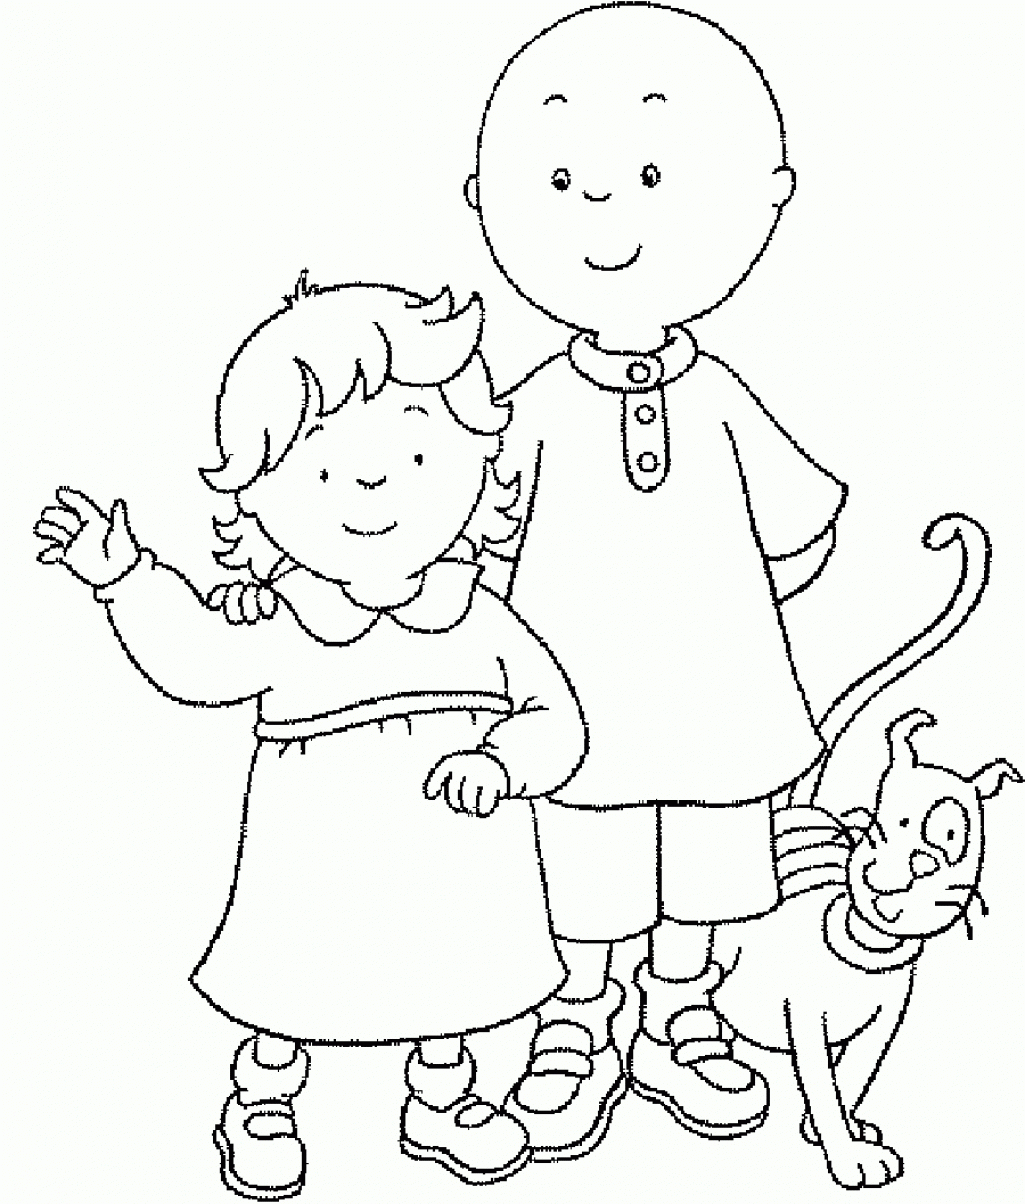 caillou printable coloring pages free